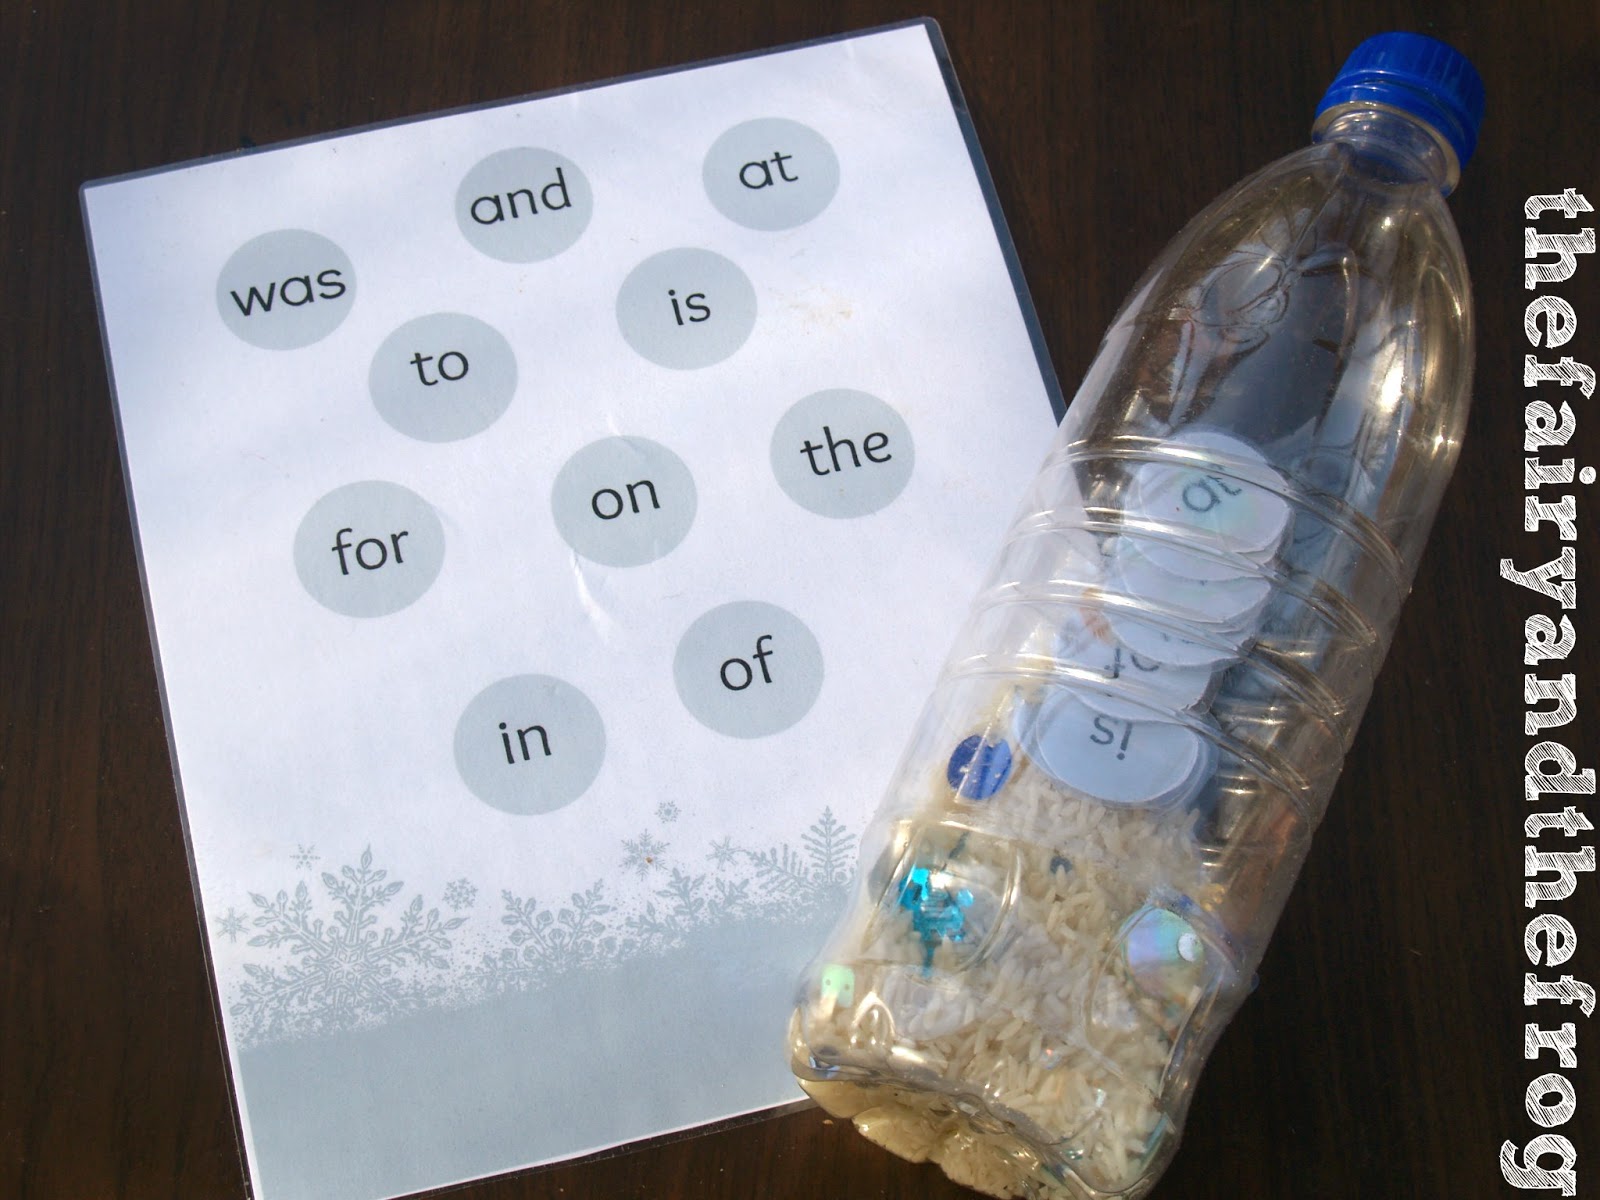 learning sight words